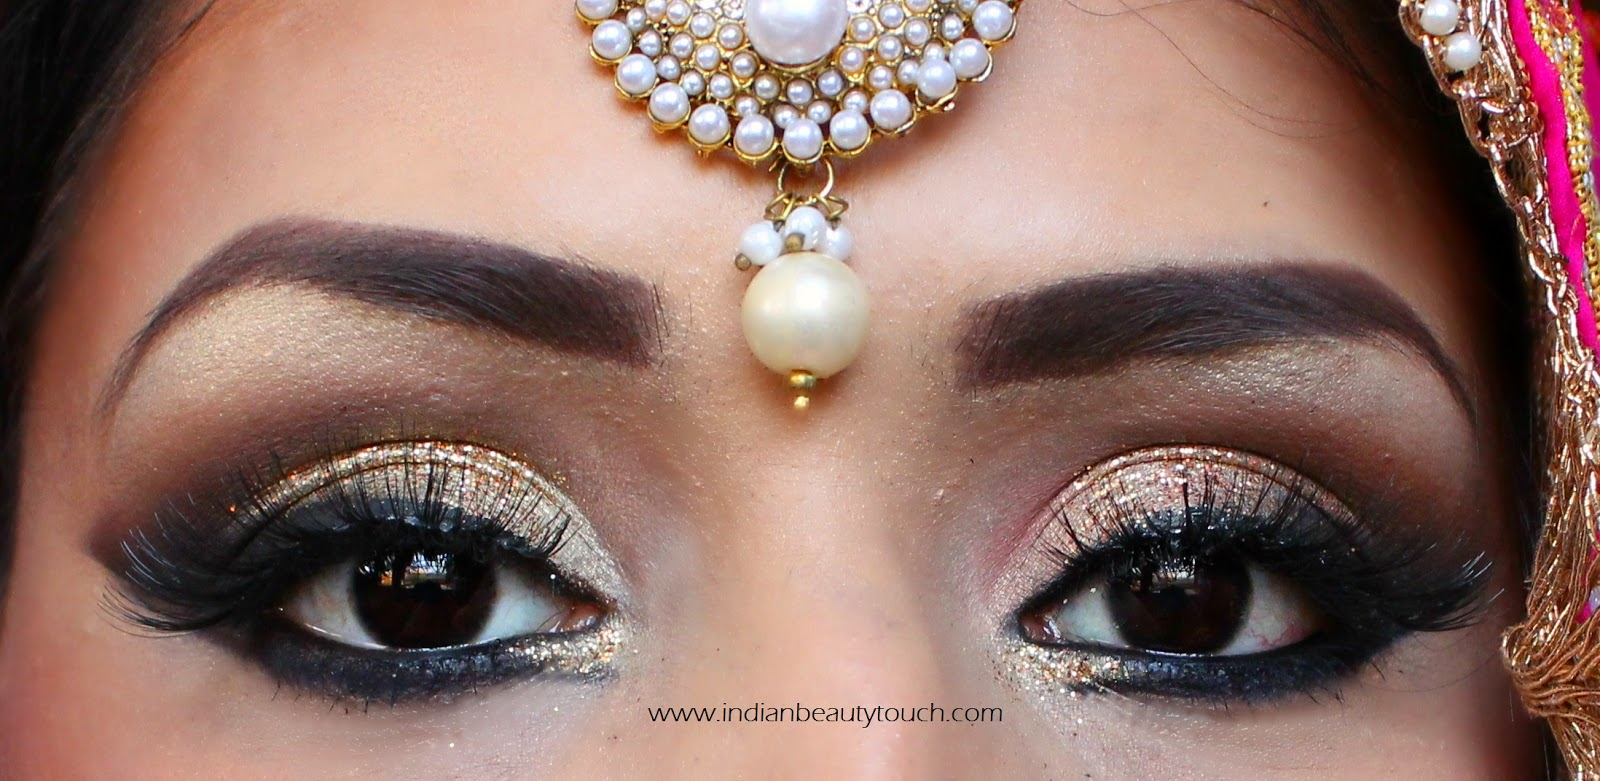 Bridal Eyes Makeup Pictures How To Do Indian Bridal Eye Makeup Indian Beauty Touch